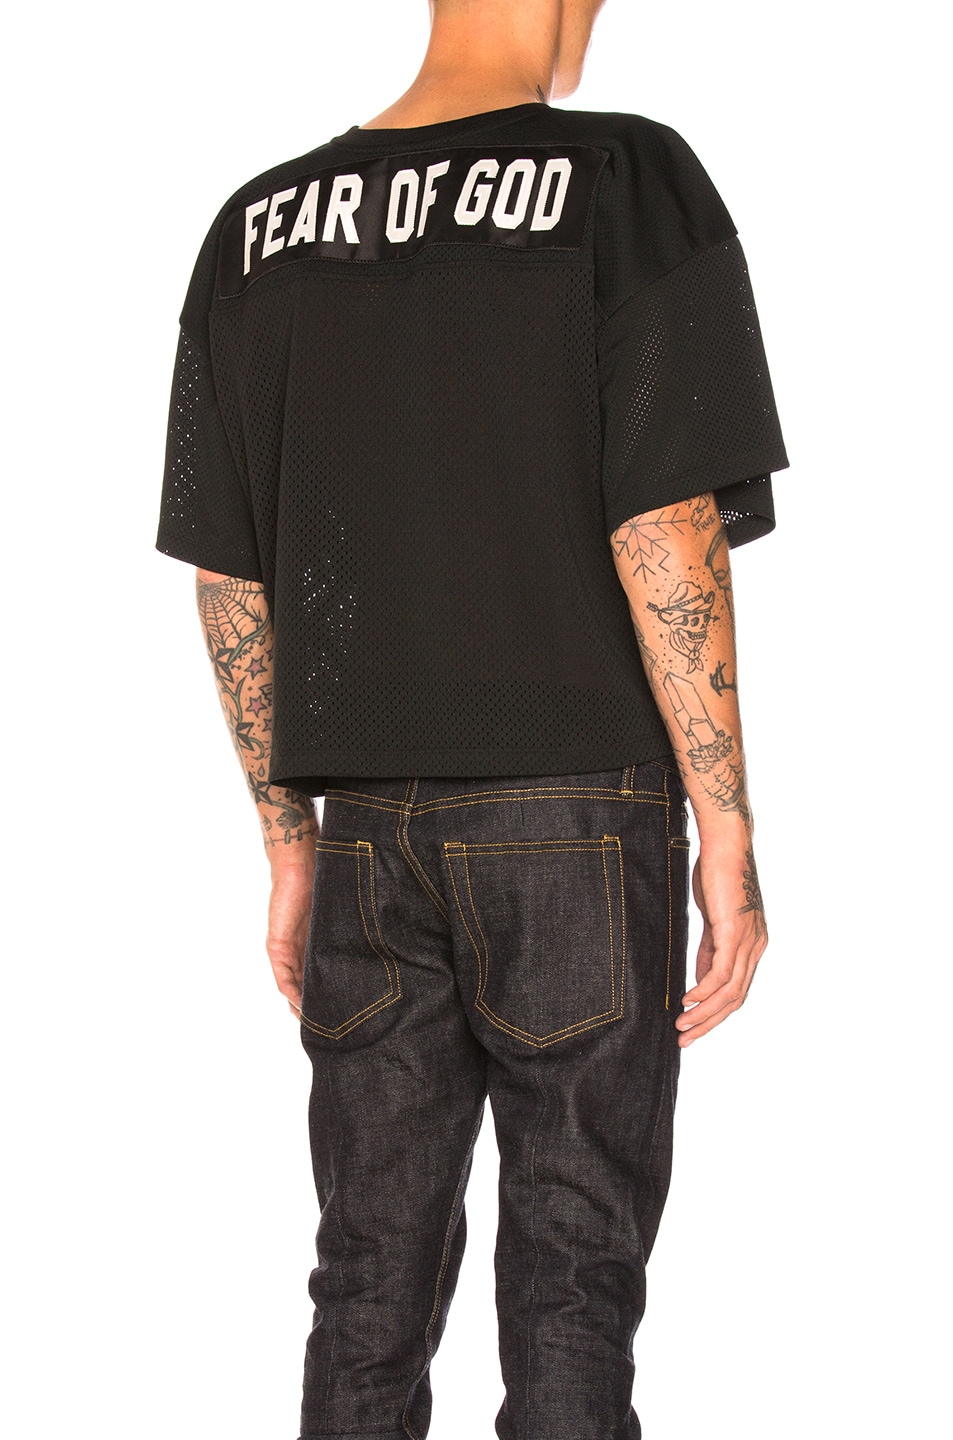 Image 1 of Fear of God Mesh Football Jersey in Black